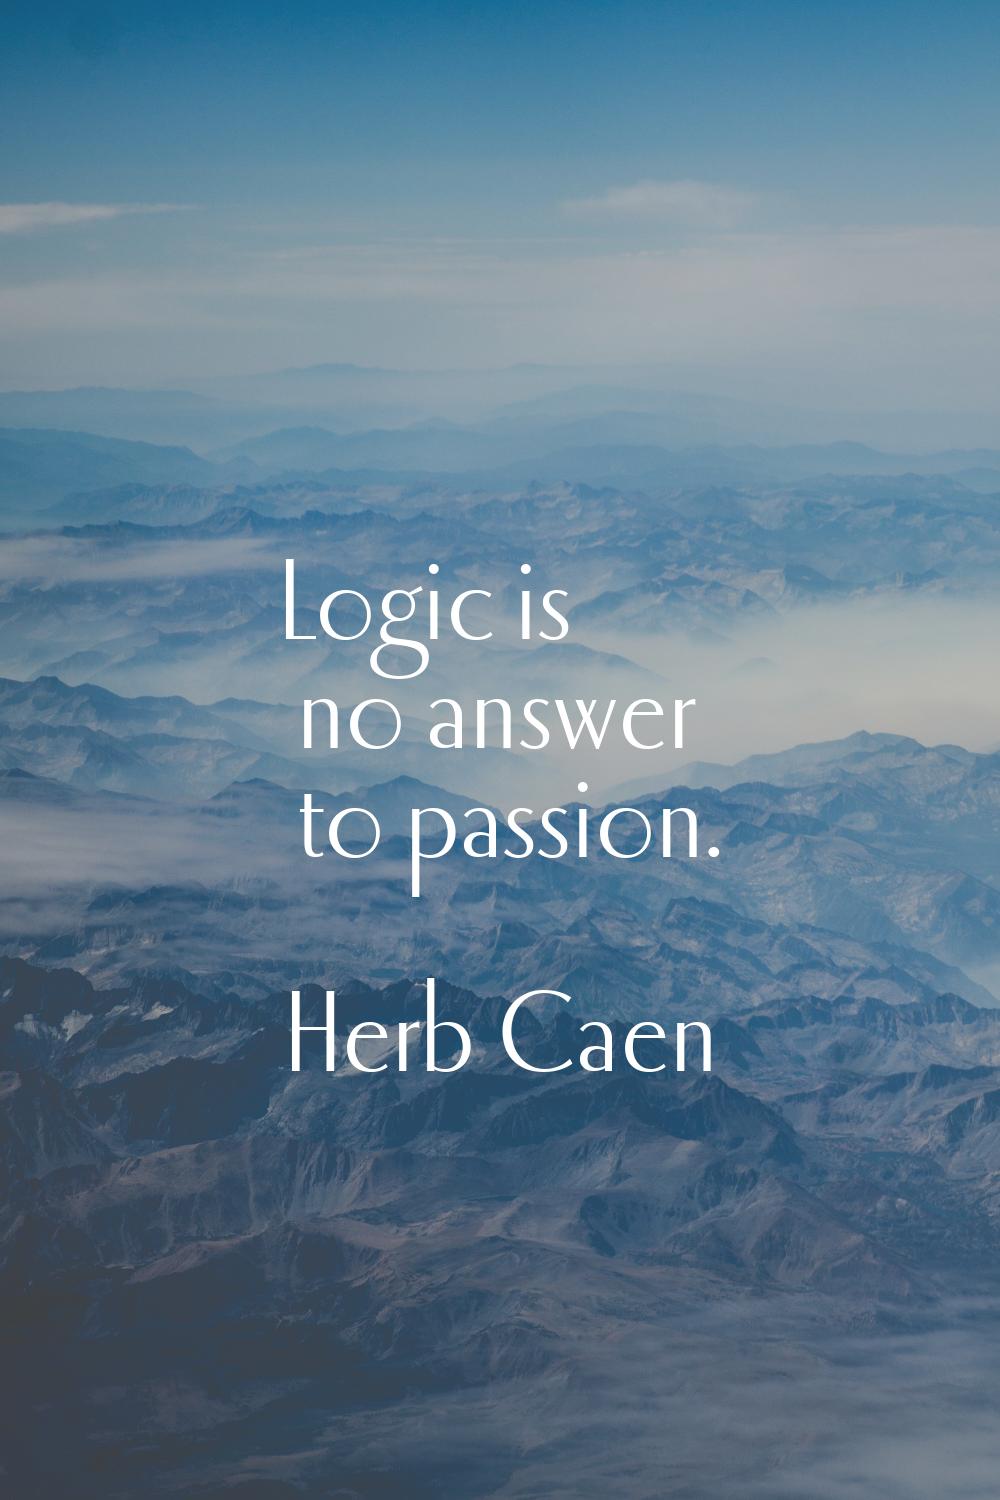 Logic is no answer to passion.